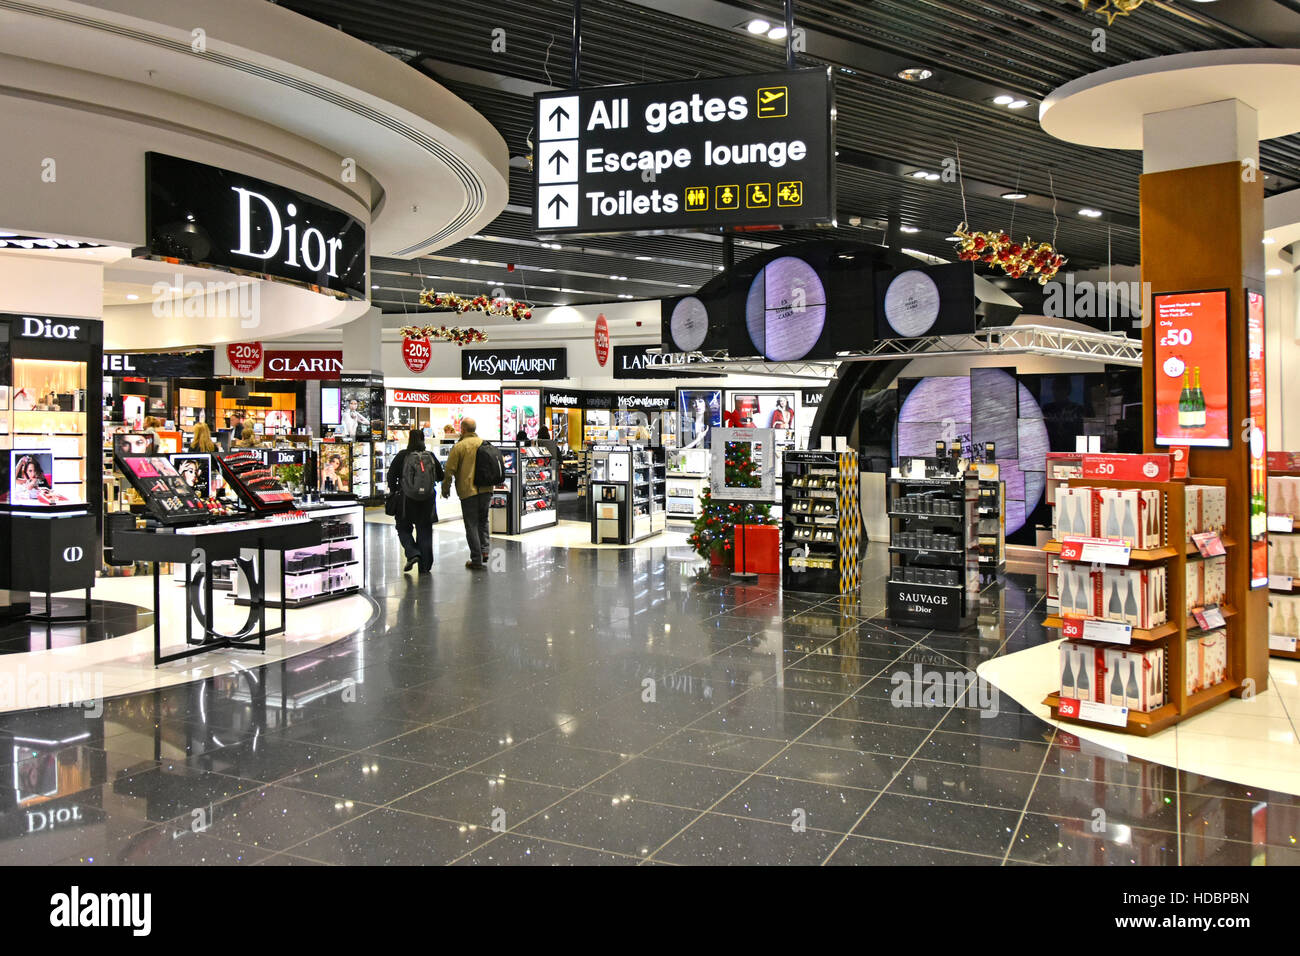 Perfume shopping in airport terminal building interior Stansted Airport London England UK where passengers walk though to reach departure lounge Stock Photo